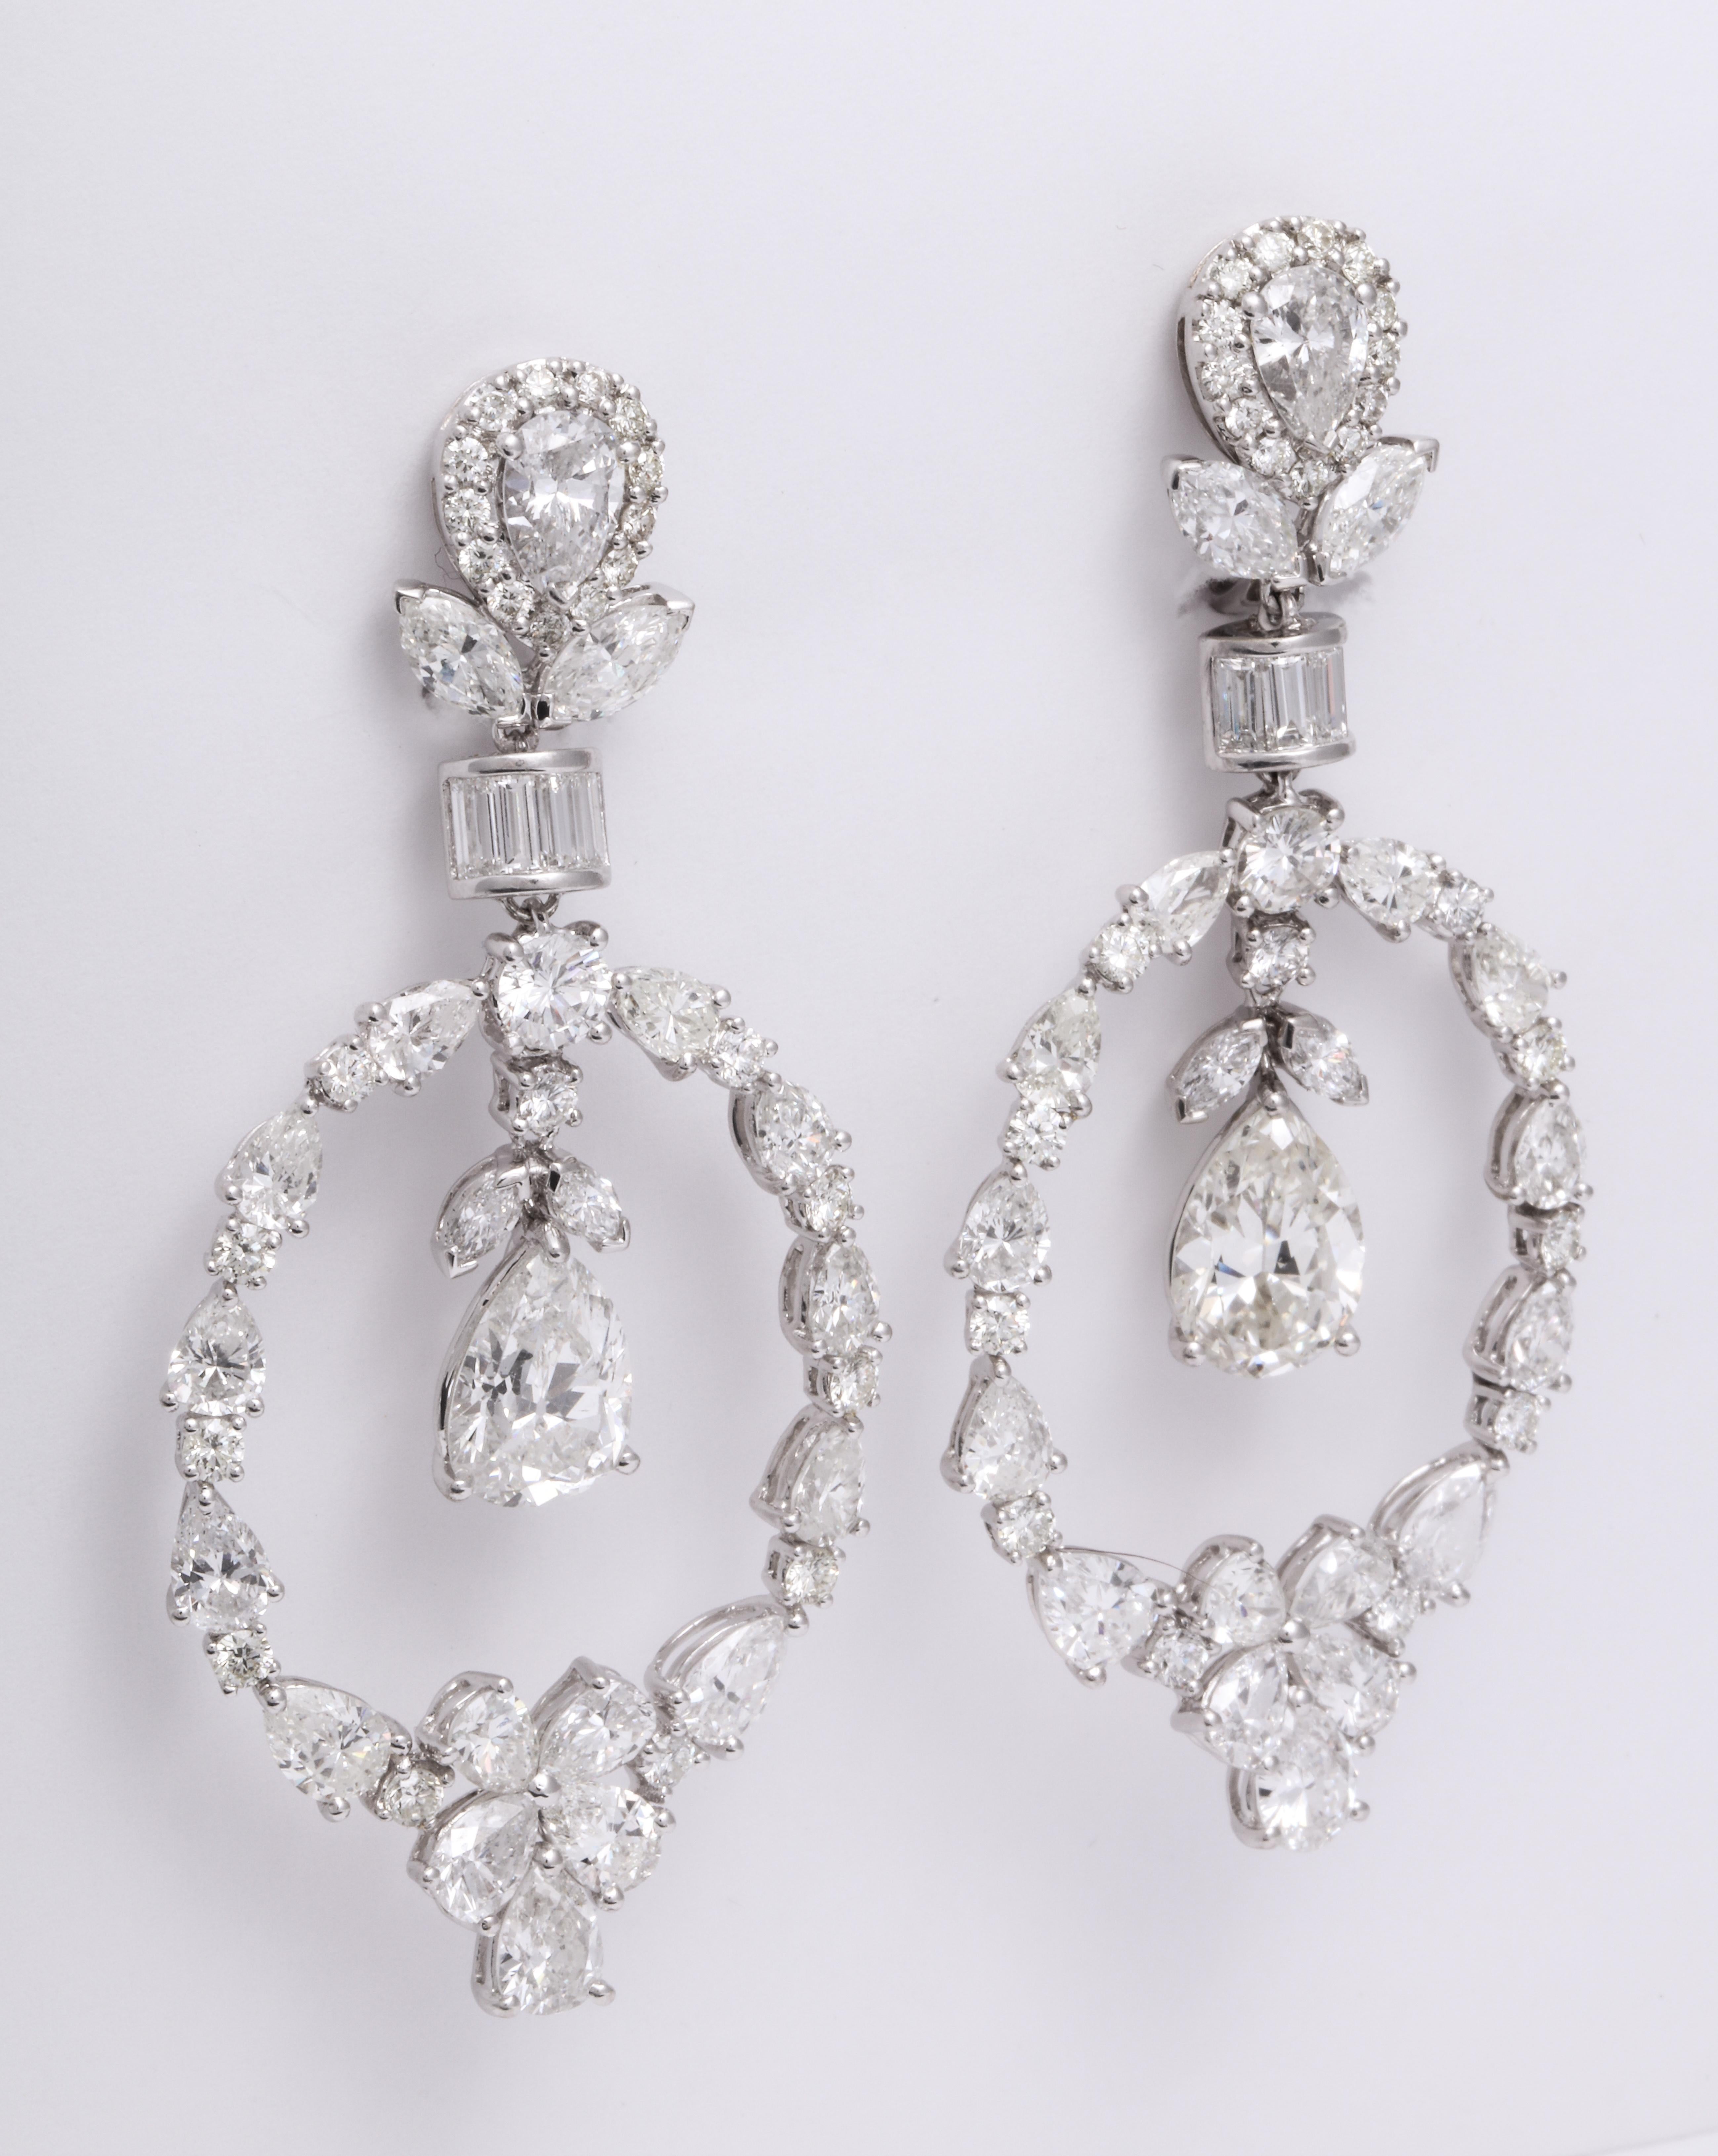 Elegant and showstopping handmade 18 Karat white gold chandelier earrings mounted with inverted pear shape diamond studs within a round brilliant-cut, marquise, and baguette diamond frame, suspending an articulating pear shape and round